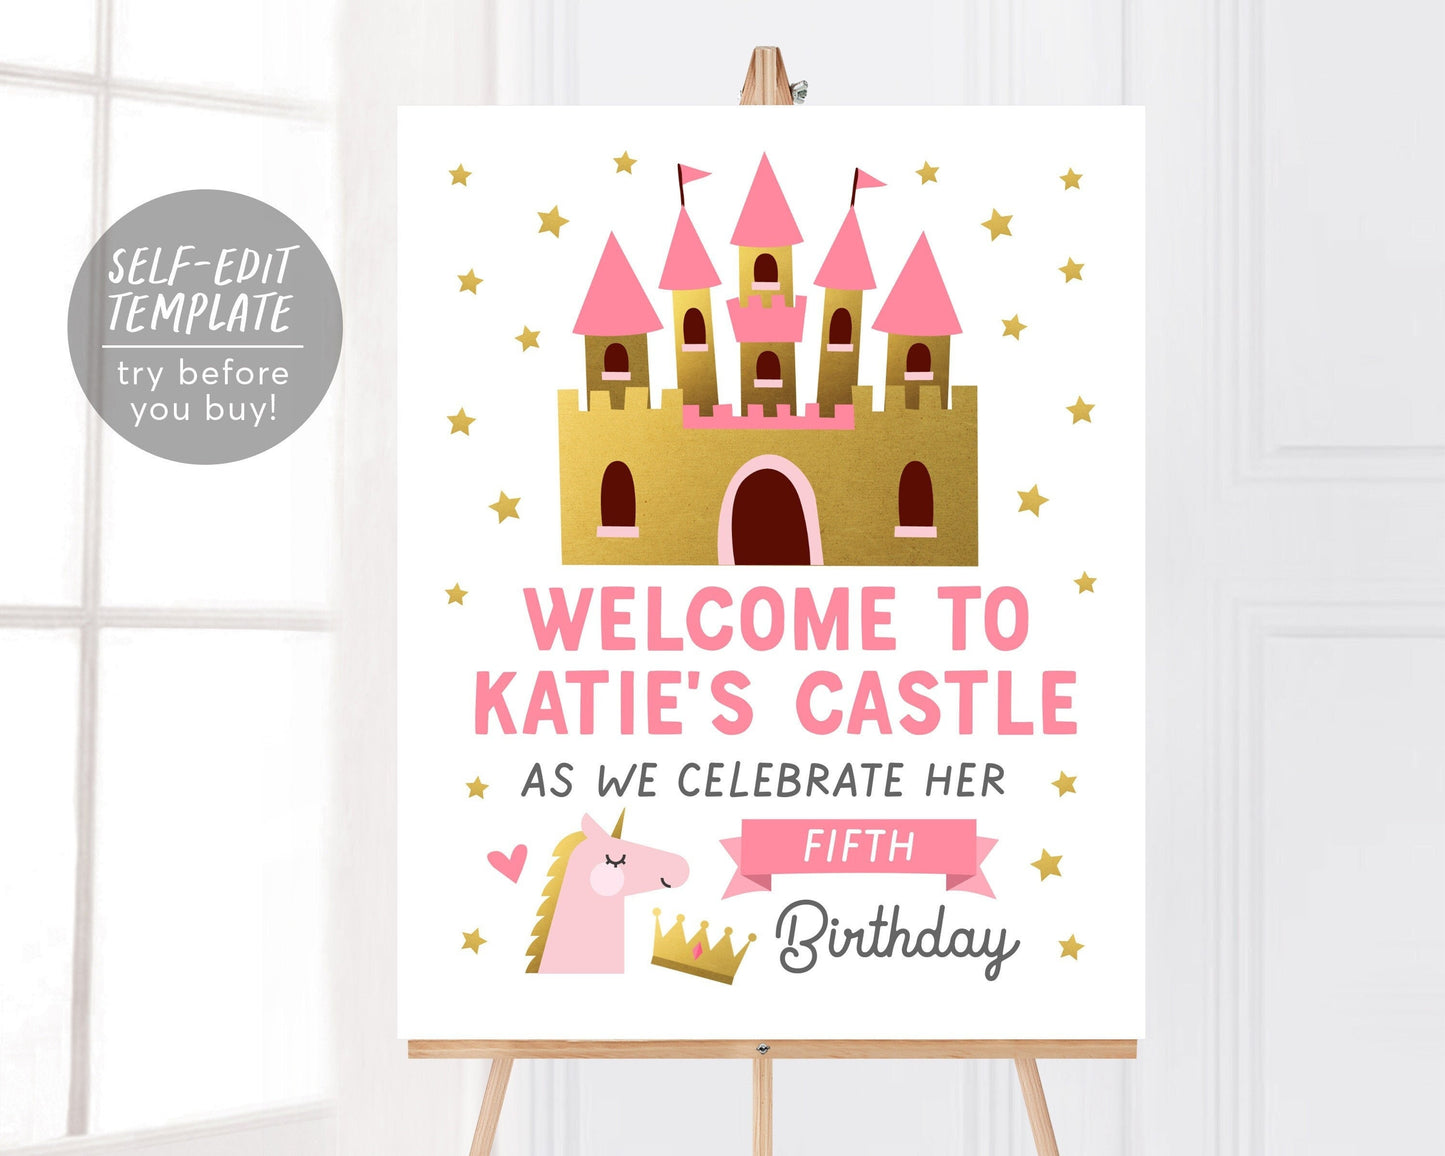 Editable Princess Birthday Welcome Sign Template, Princess Castle Party Sign, Unicorn Yard Lawn Sign, Royal Celebration, Pink and Gold